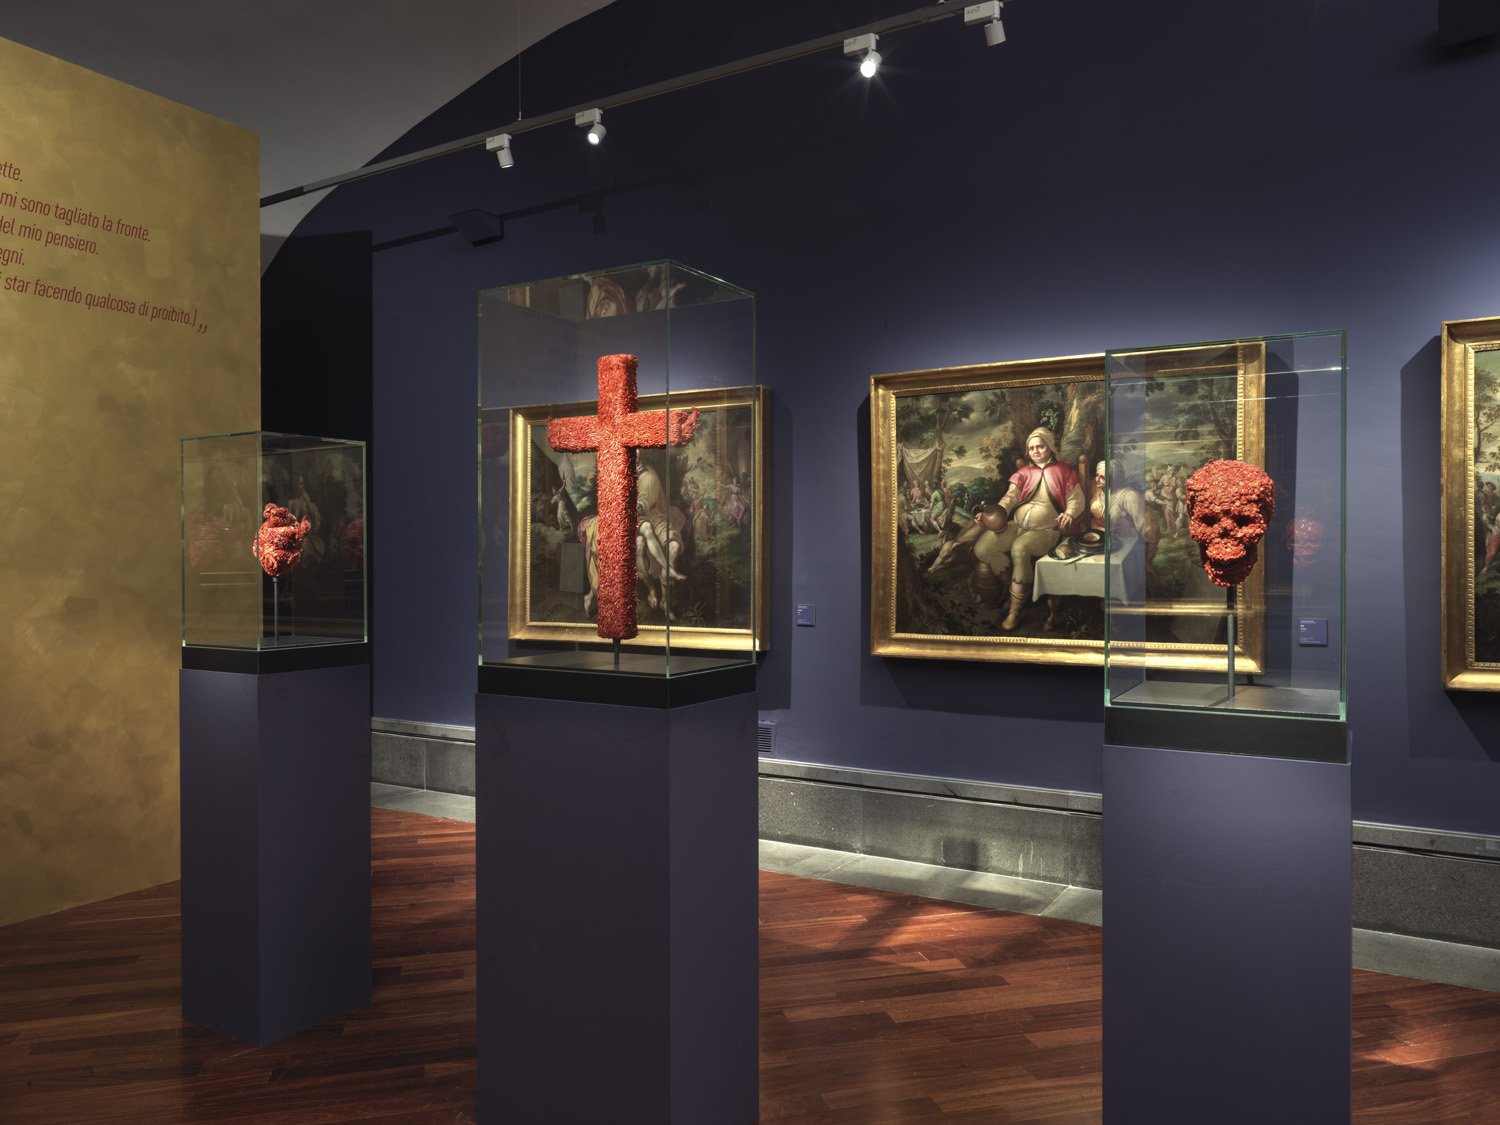 3. Jan Fabre, Golden and Coral Sculptures, Blood Drawings, 30 March - 15 September 2019, installation view at Museo e Real Bosco di Capodimonte, Naples.jpg